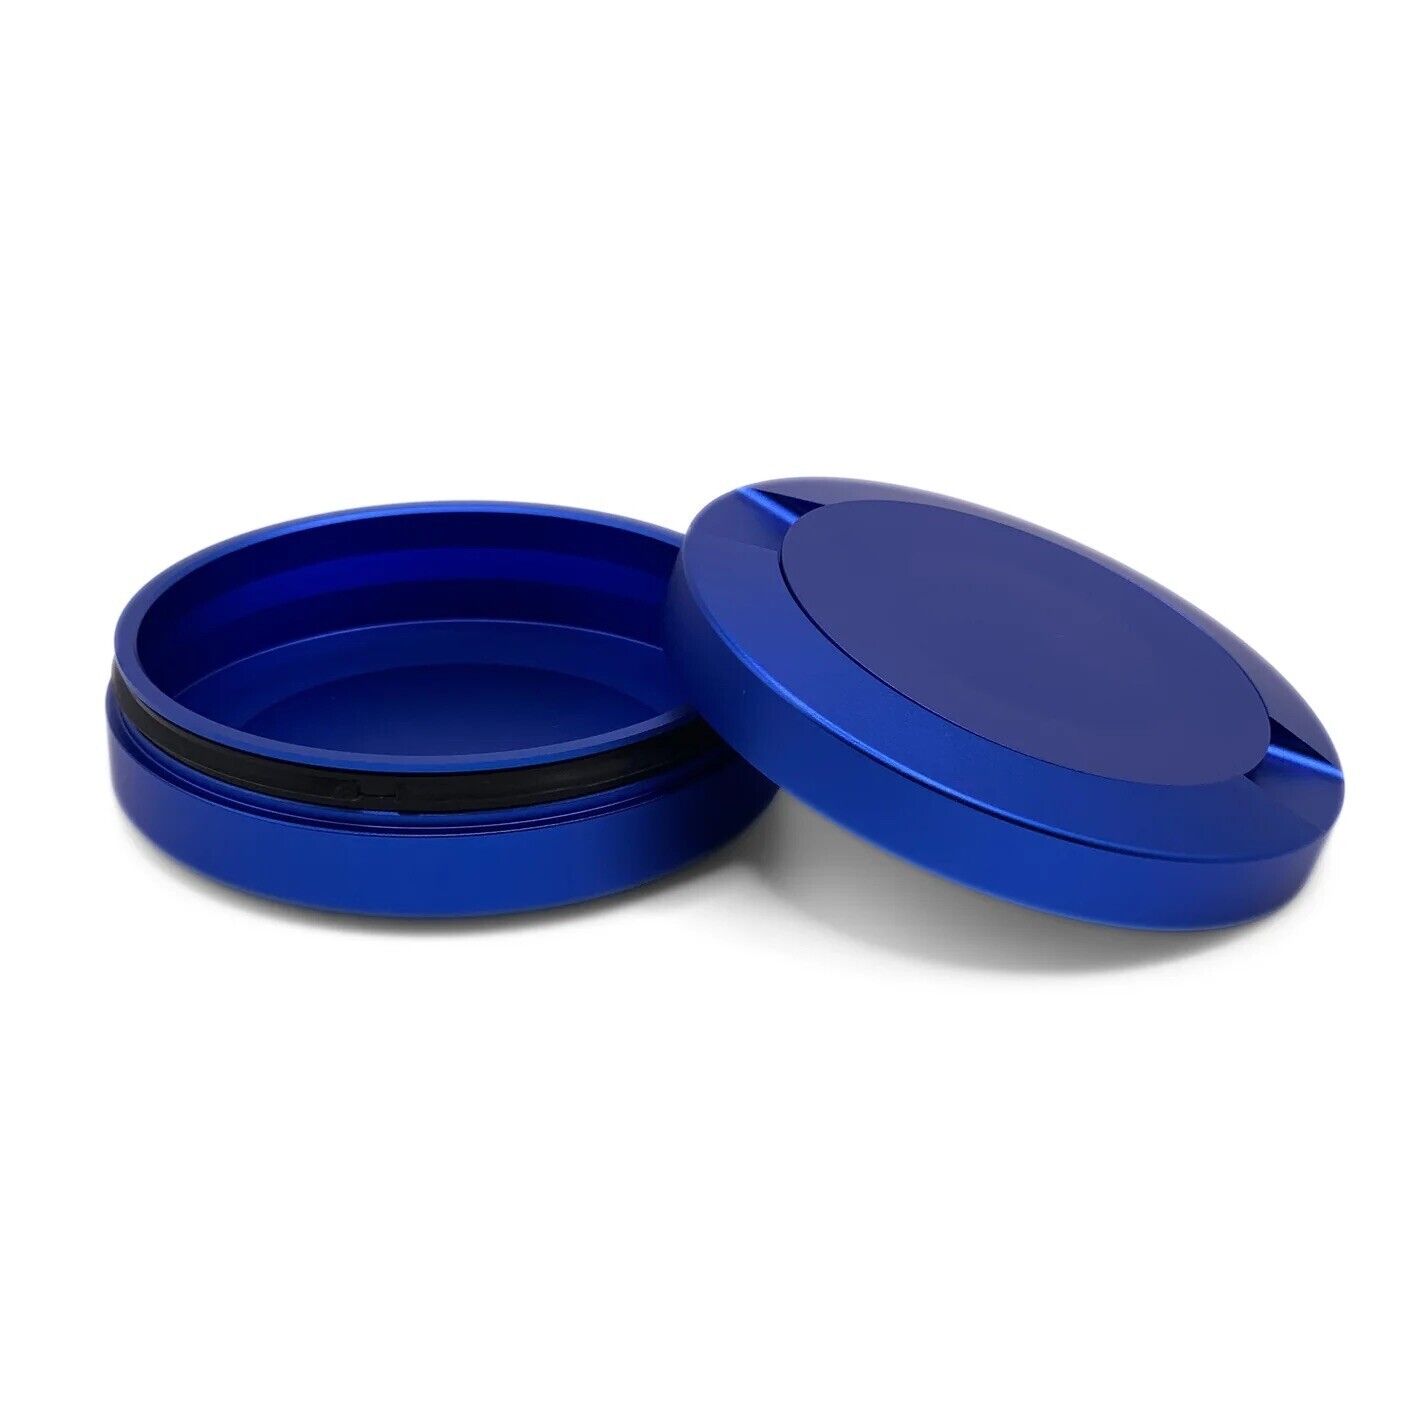 Blue Zyn Metal Container, Snus Container, Metal Zyn Can, Zyn Can, Zyn Holder